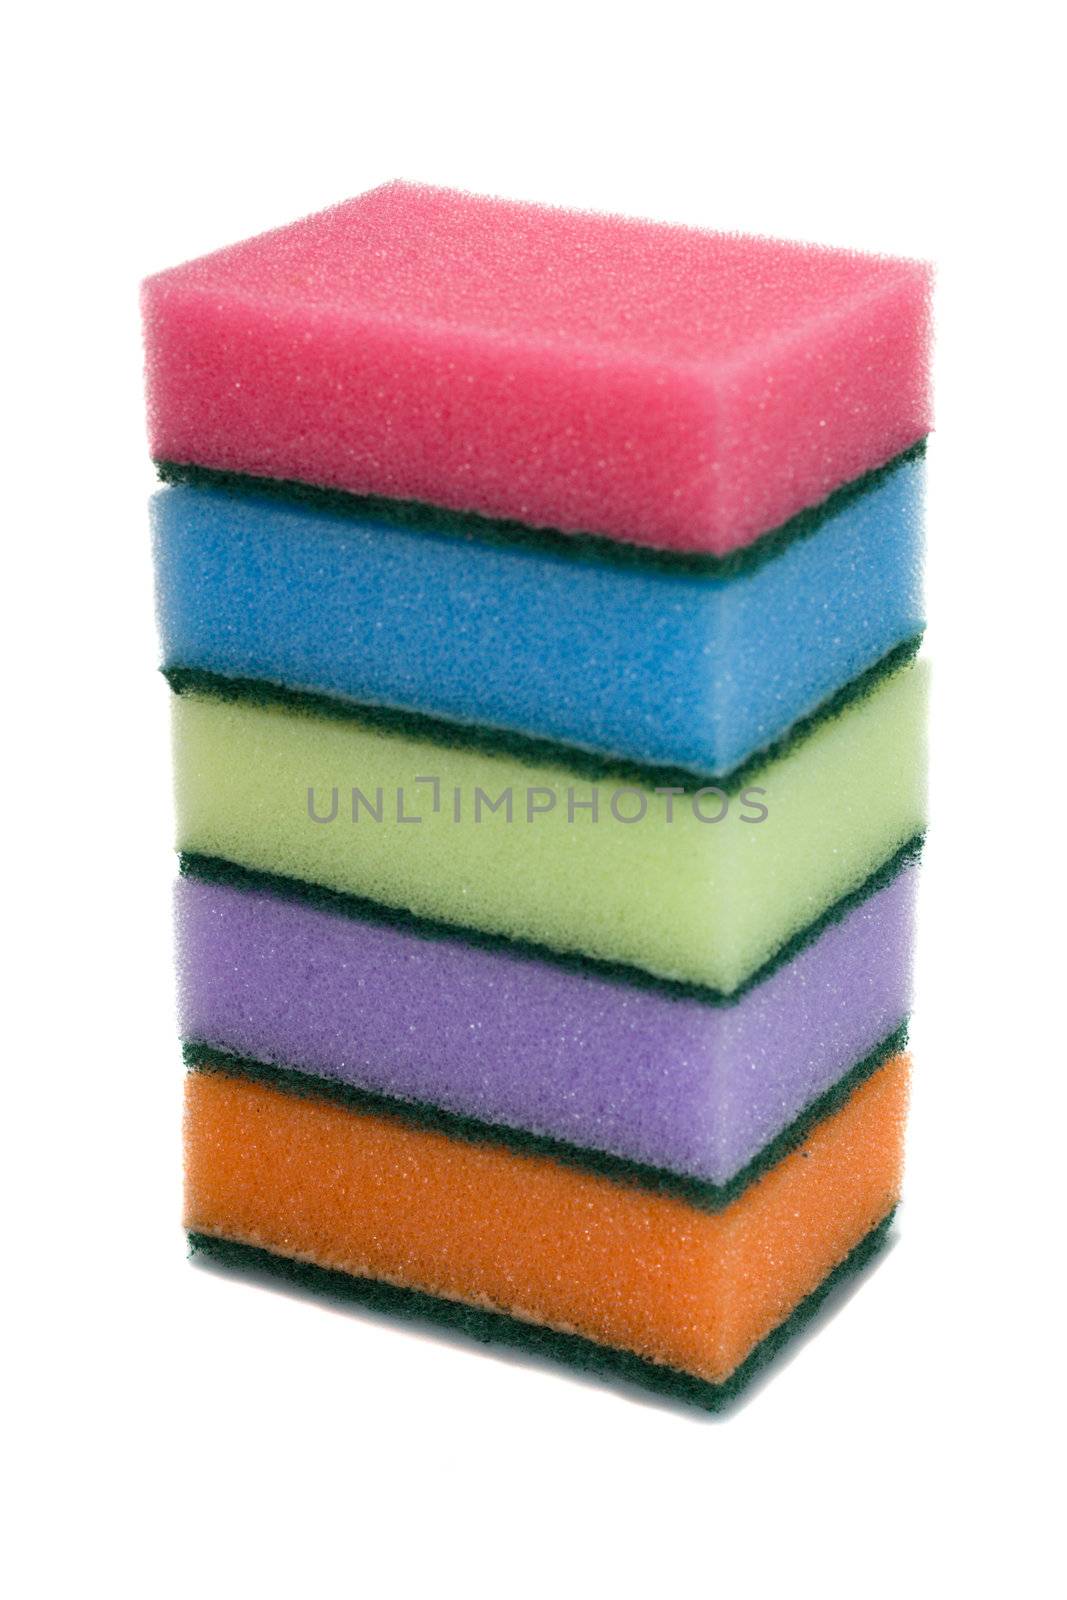 five colored sponges, isolated on white